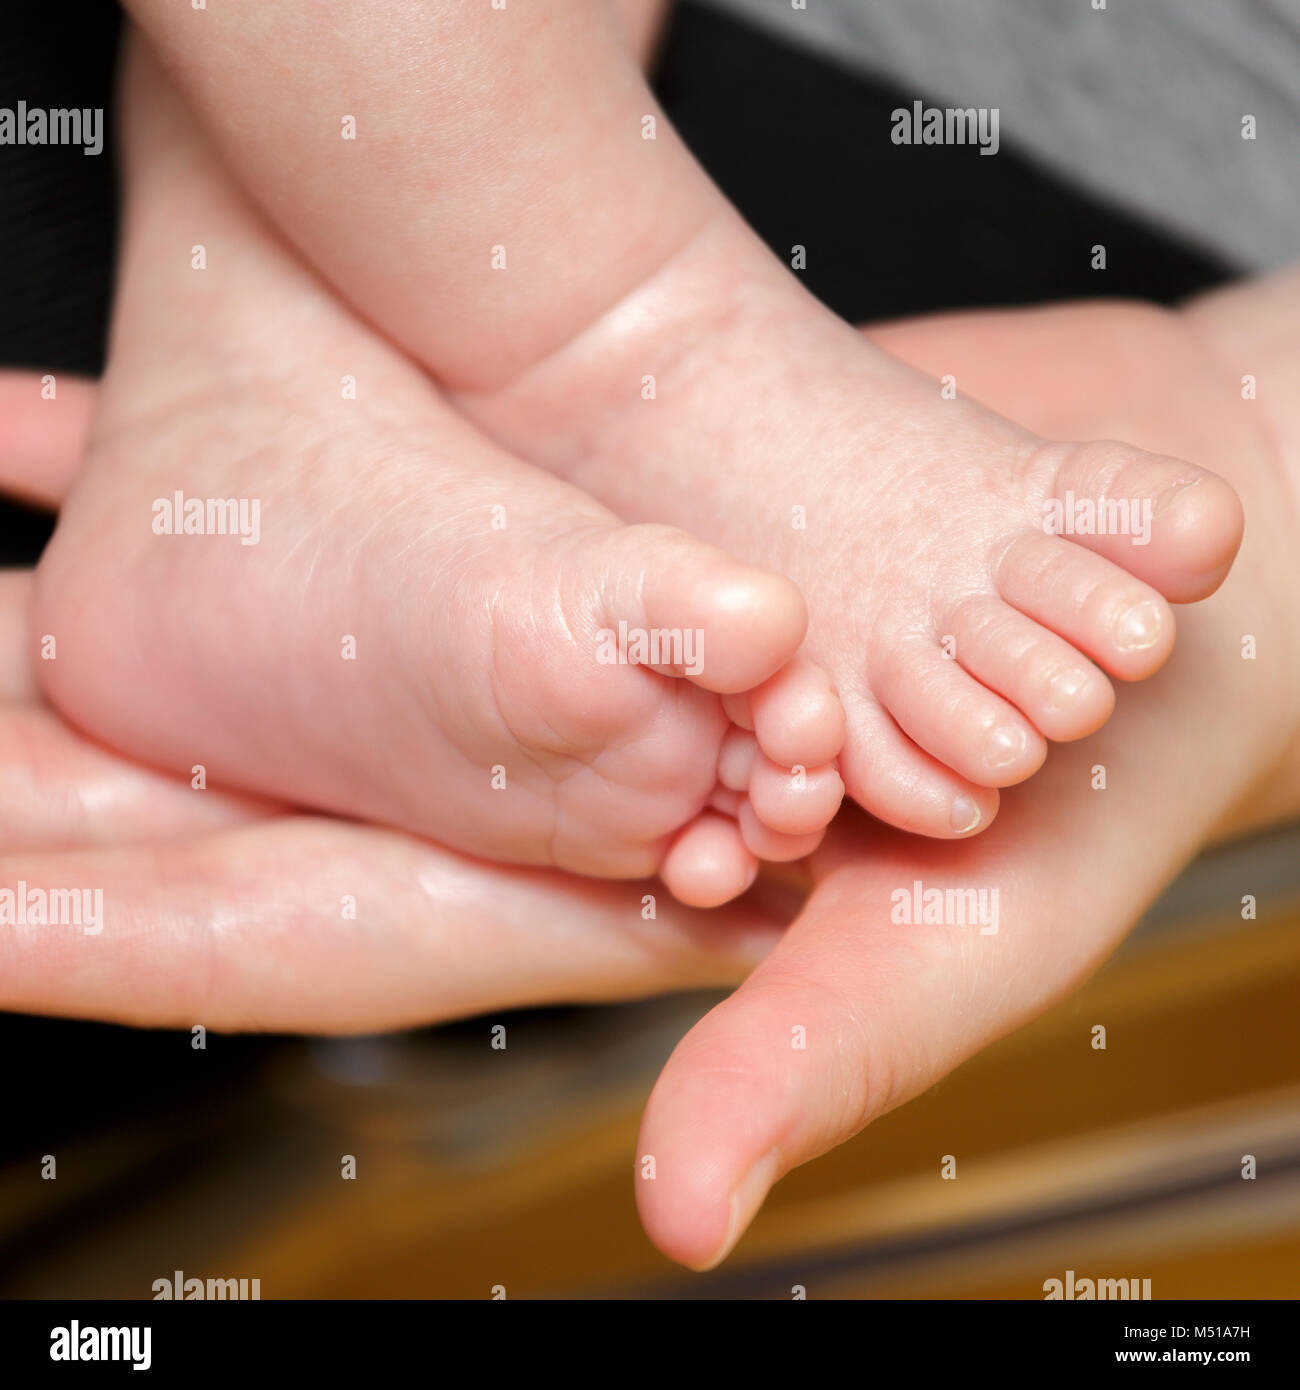 Feet of newborn baby in the hand of mother. Sweet baby's feet Stock Photo